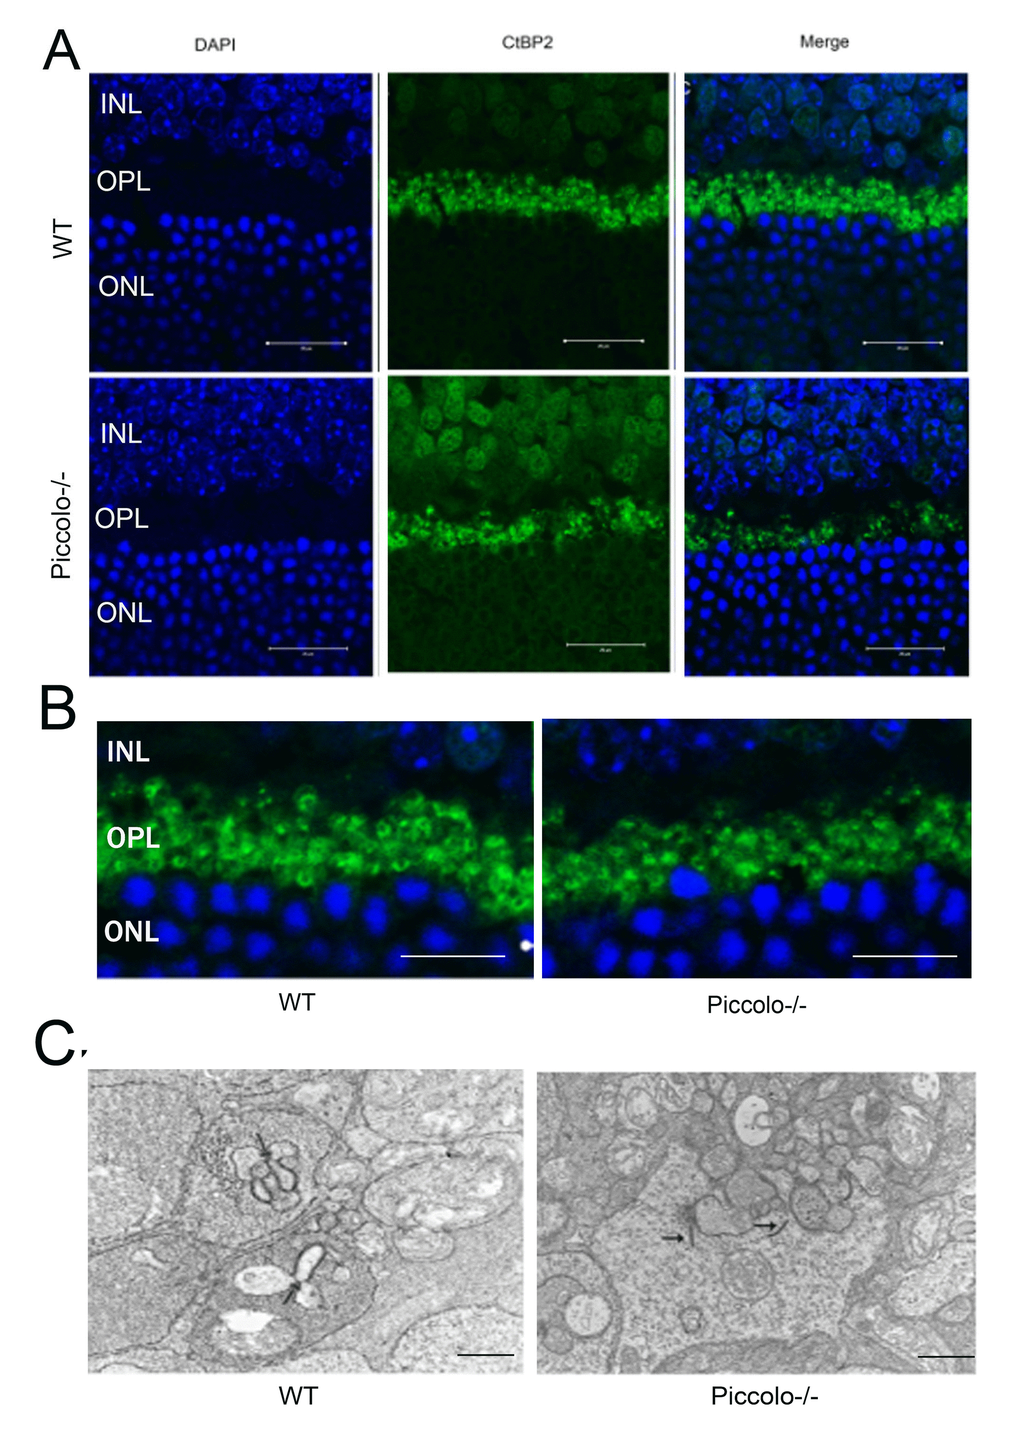 The morphology, location, and numbers of ribbon synapses in Piccolo-/- mice. (A) Immunostaining with anti-CtBP2 antibodies of retina cryosections from wild type (WT) and Piccolo-/- mice at P30. DAPI stains nuclei. Scale bars: 20 μm. (B) The morphology of ribbon synapses in the Piccolo-/- and WT mice. Scale bars: 10 μm. (C) The cytoplasmic location of retinal ribbon synapses (indicated by arrows) in Piccolo-/- mice. Scale bars: 1 μm.